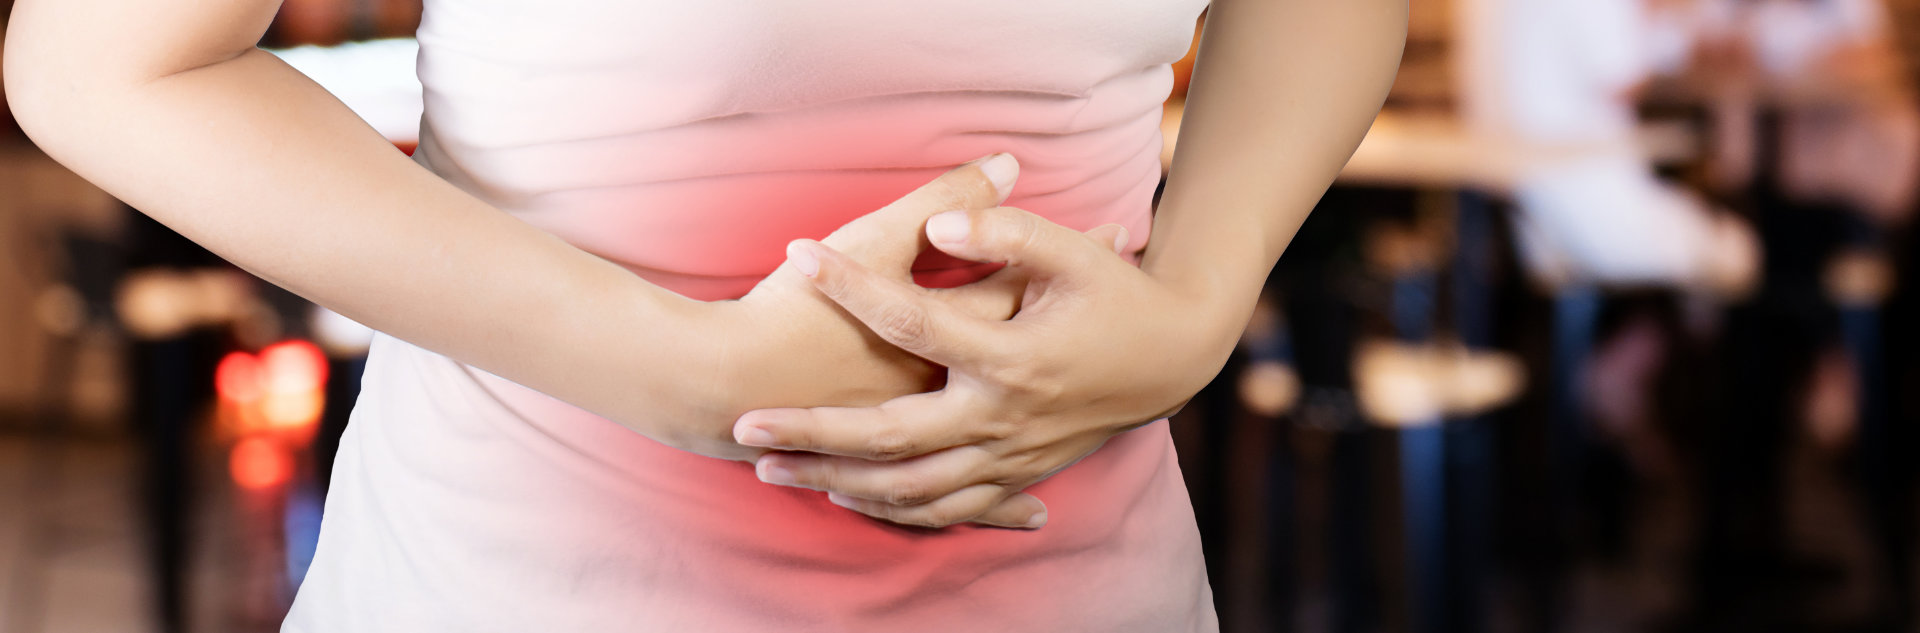 Could Your Digestive Problems Be Celiac Disease? , 